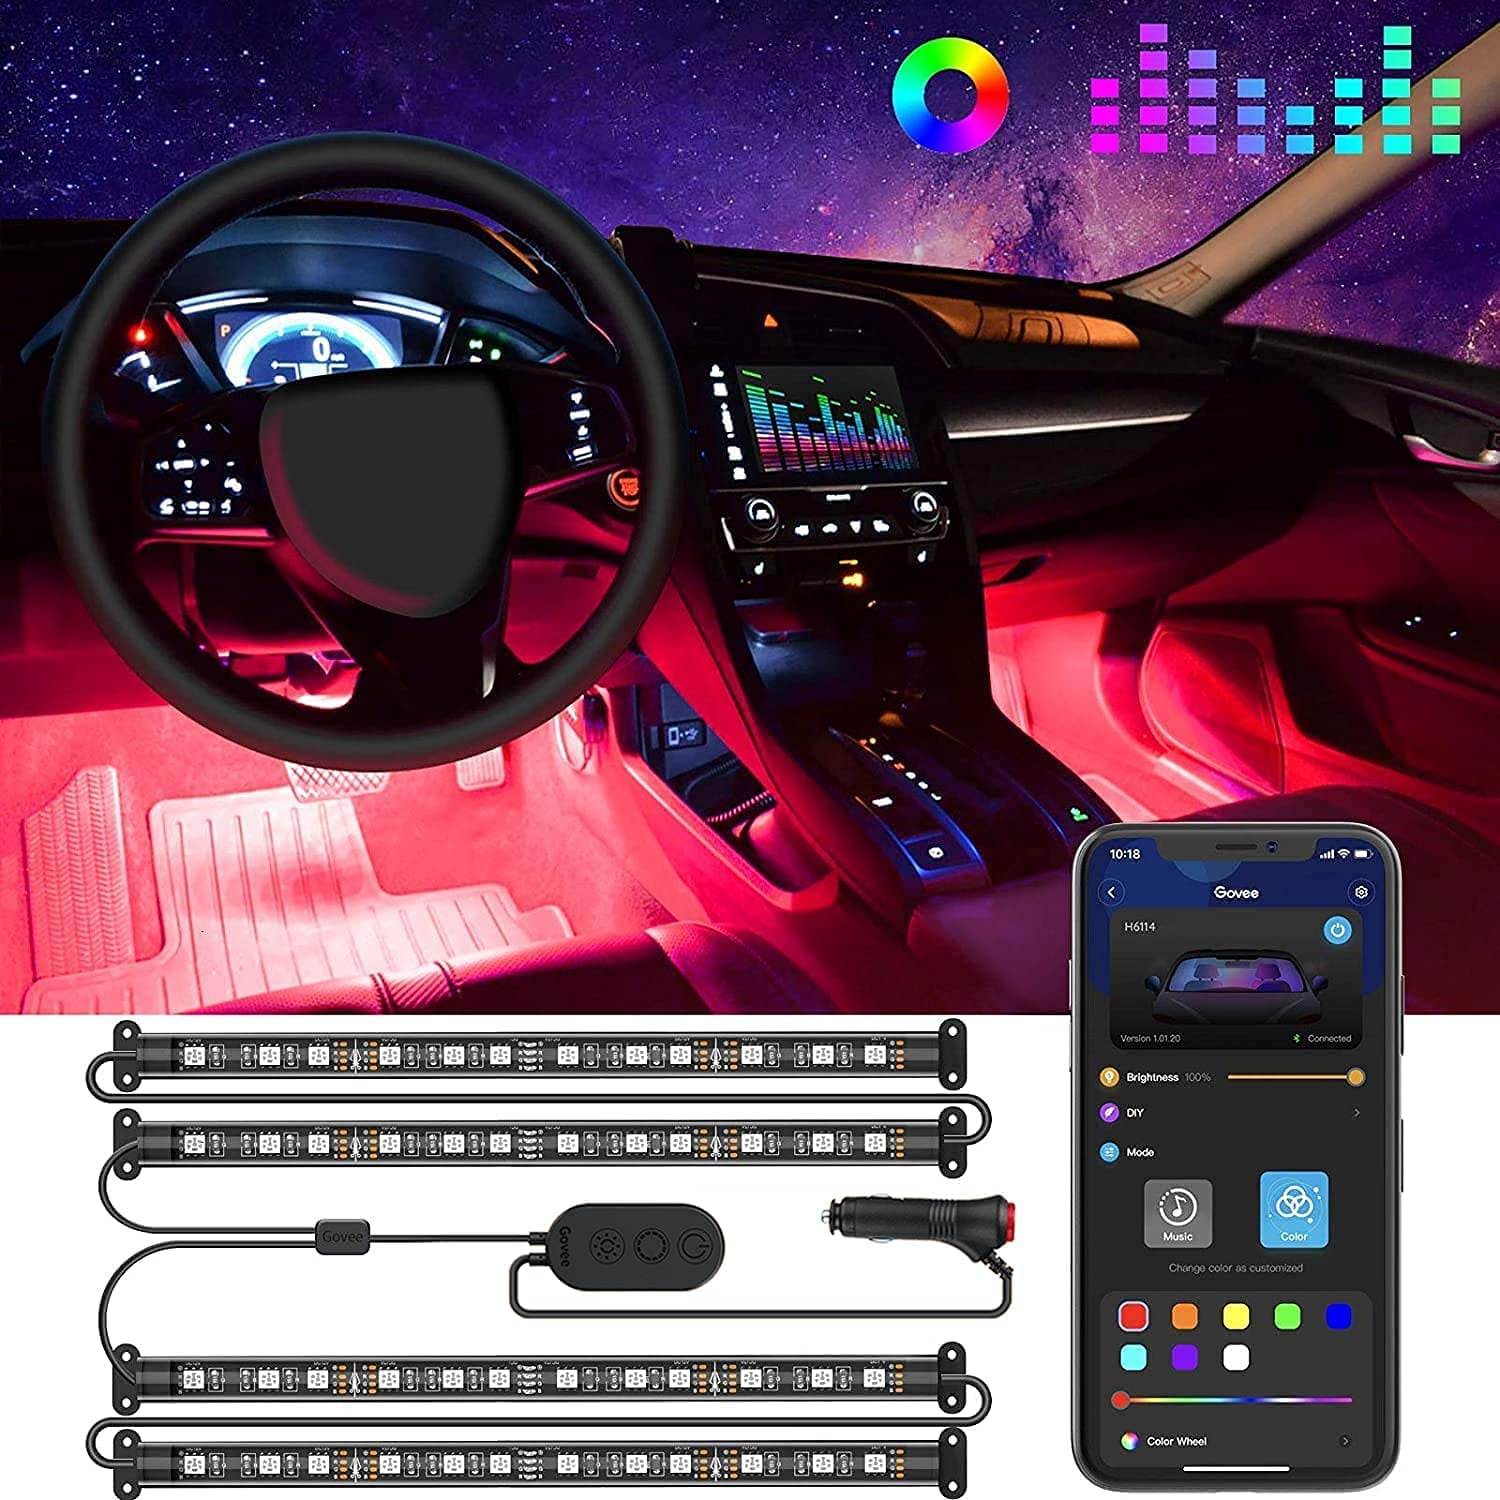 DC 12-24V 2 Lines Design Under LED Lights for Car with 16 Million Colors RGB Car Light for SUVs 7 Scene Modes Govee Exterior Car Lights with App Control Sync to Music Trucks 